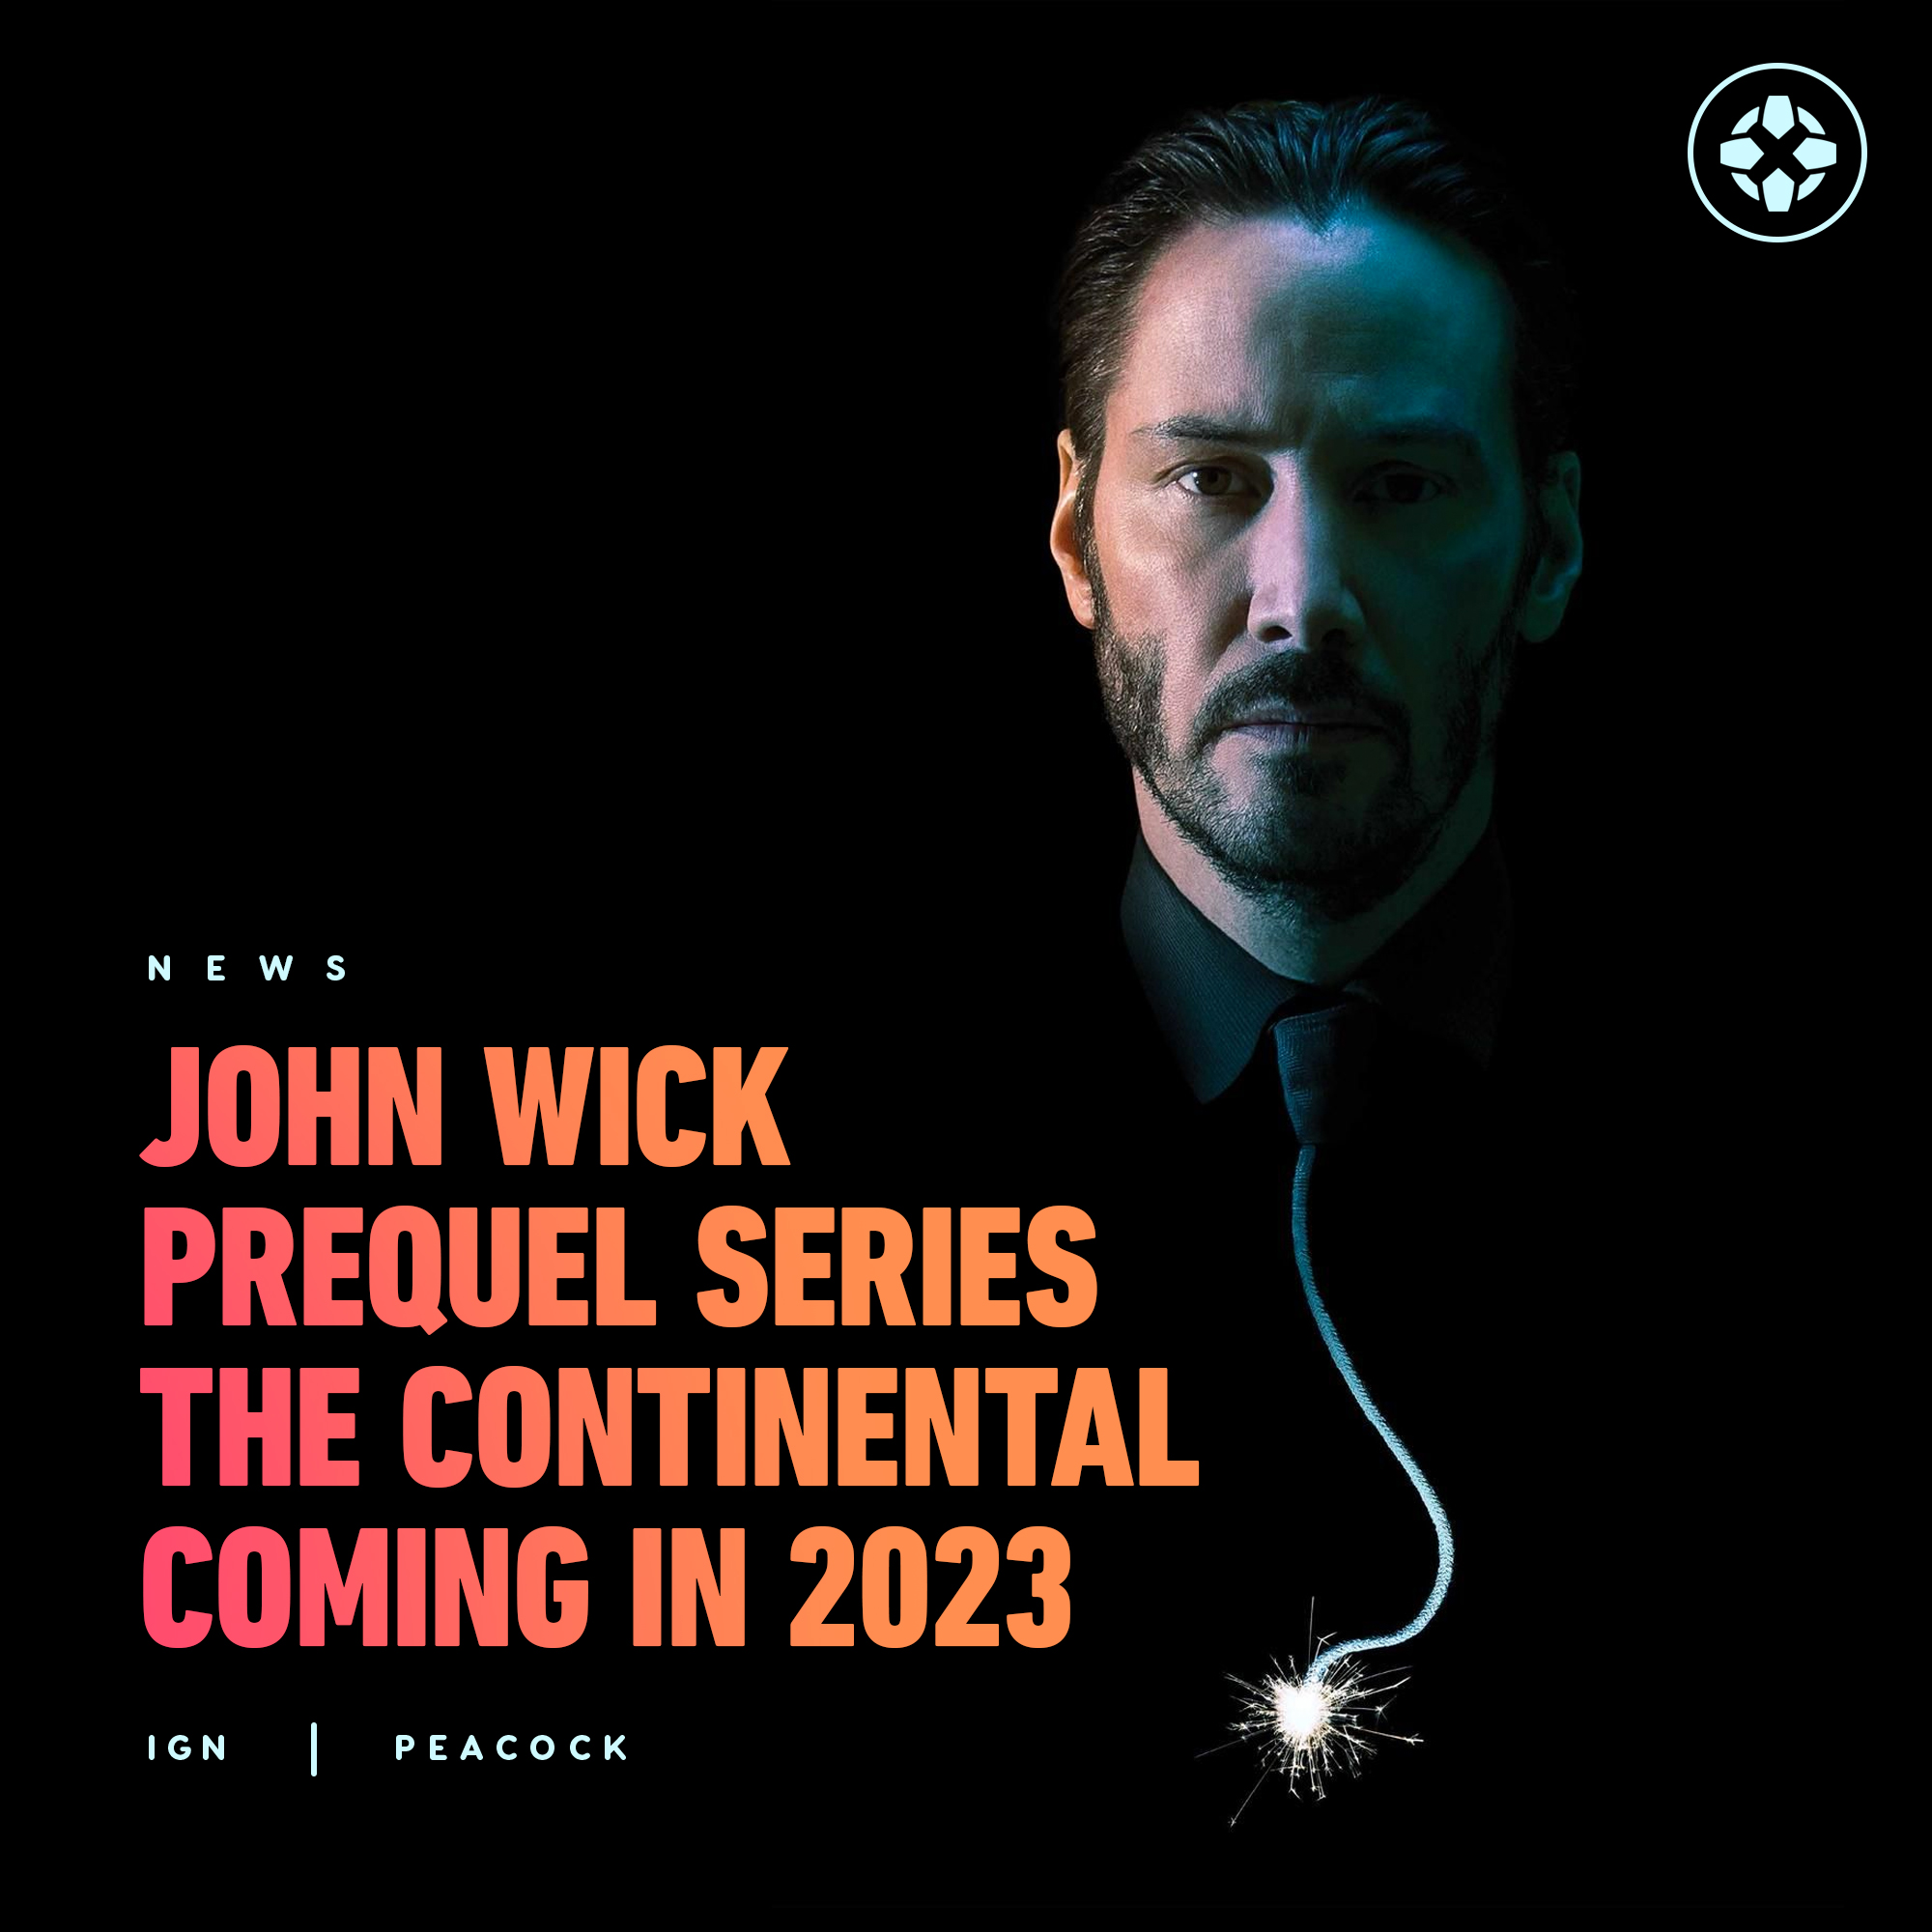 The Continental' TV Review: 'John Wick' Prequel On Peacock